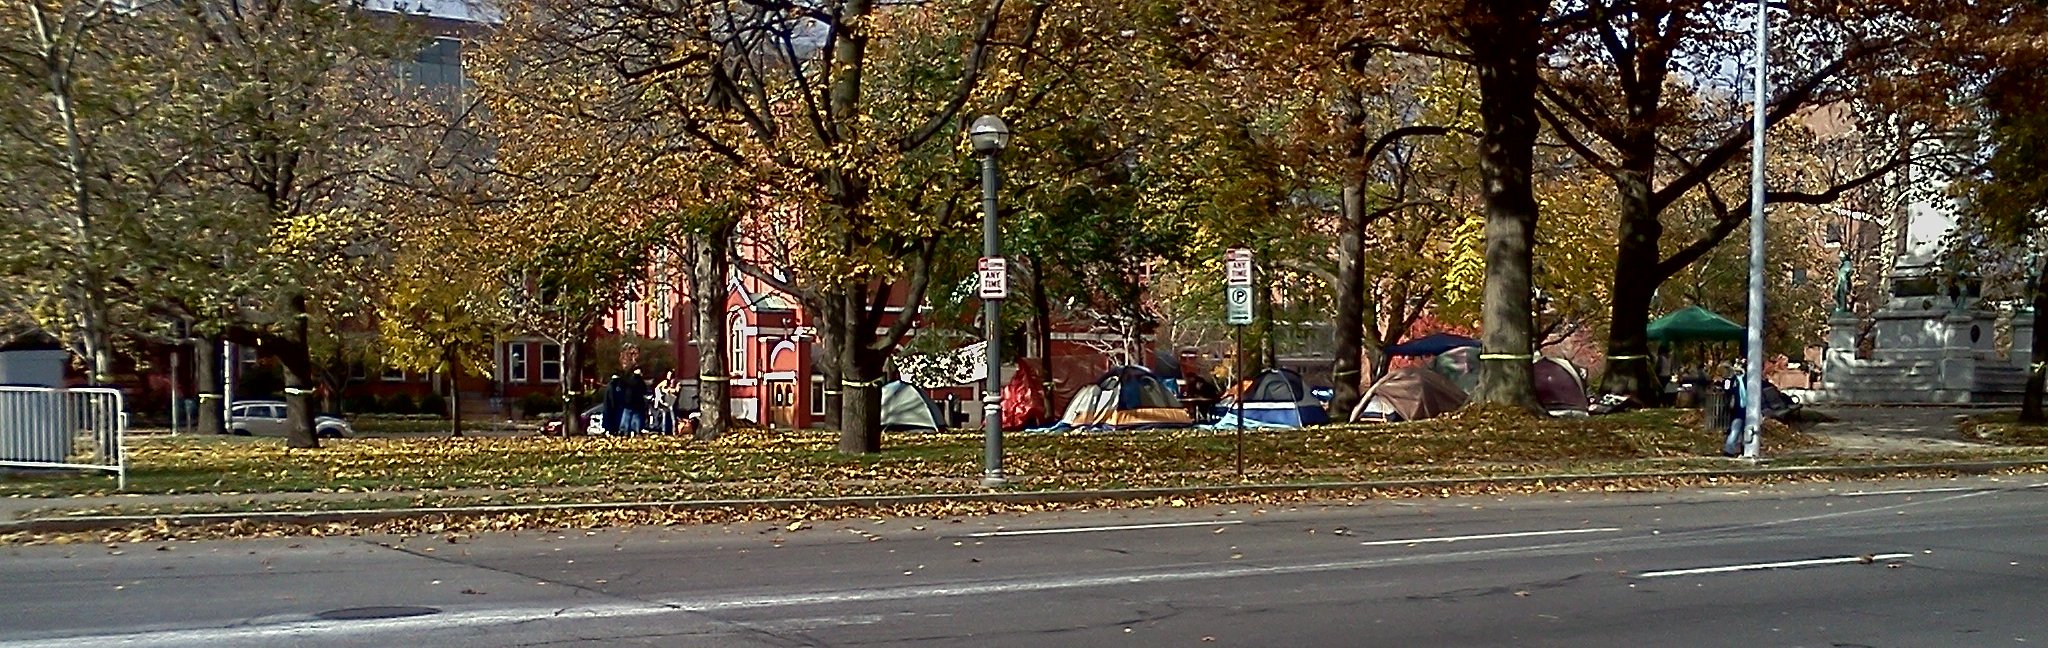 Occupy Rochester 2011-11-11 wide view.jpg